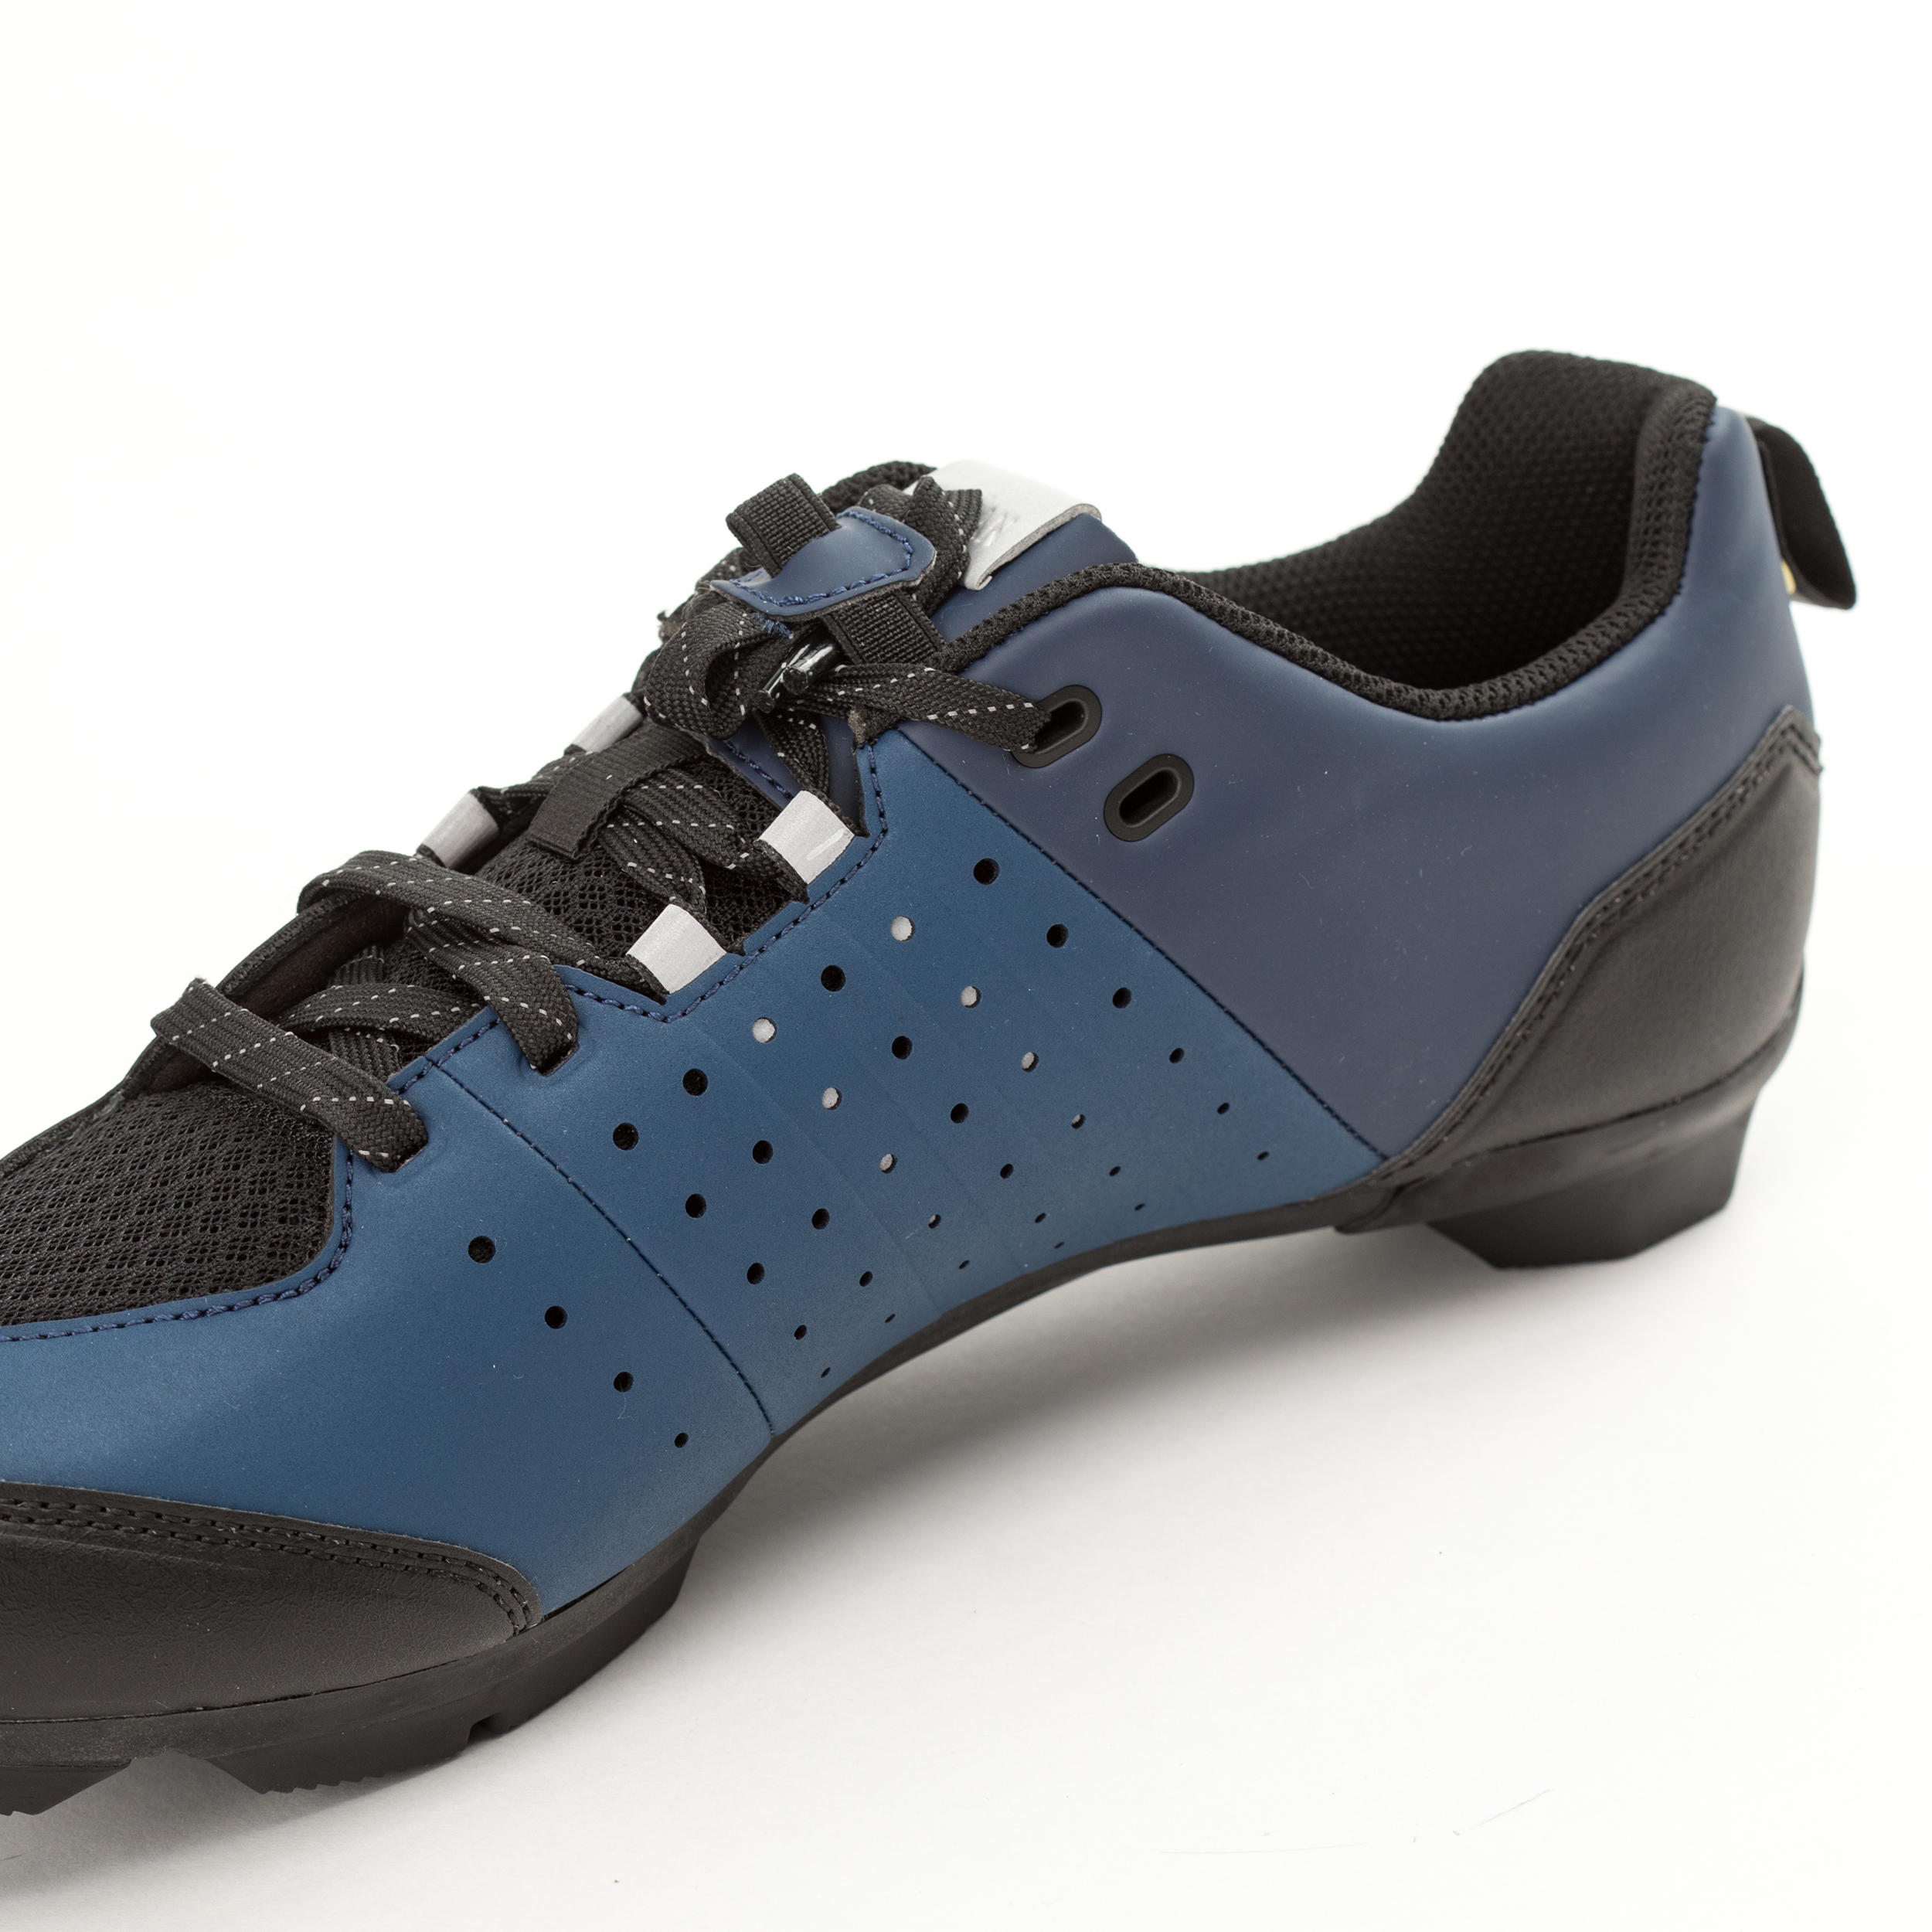 Road and Gravel Cycling Lace-Up SPD Shoes GRVL 500 - Blue / Navy 7/7